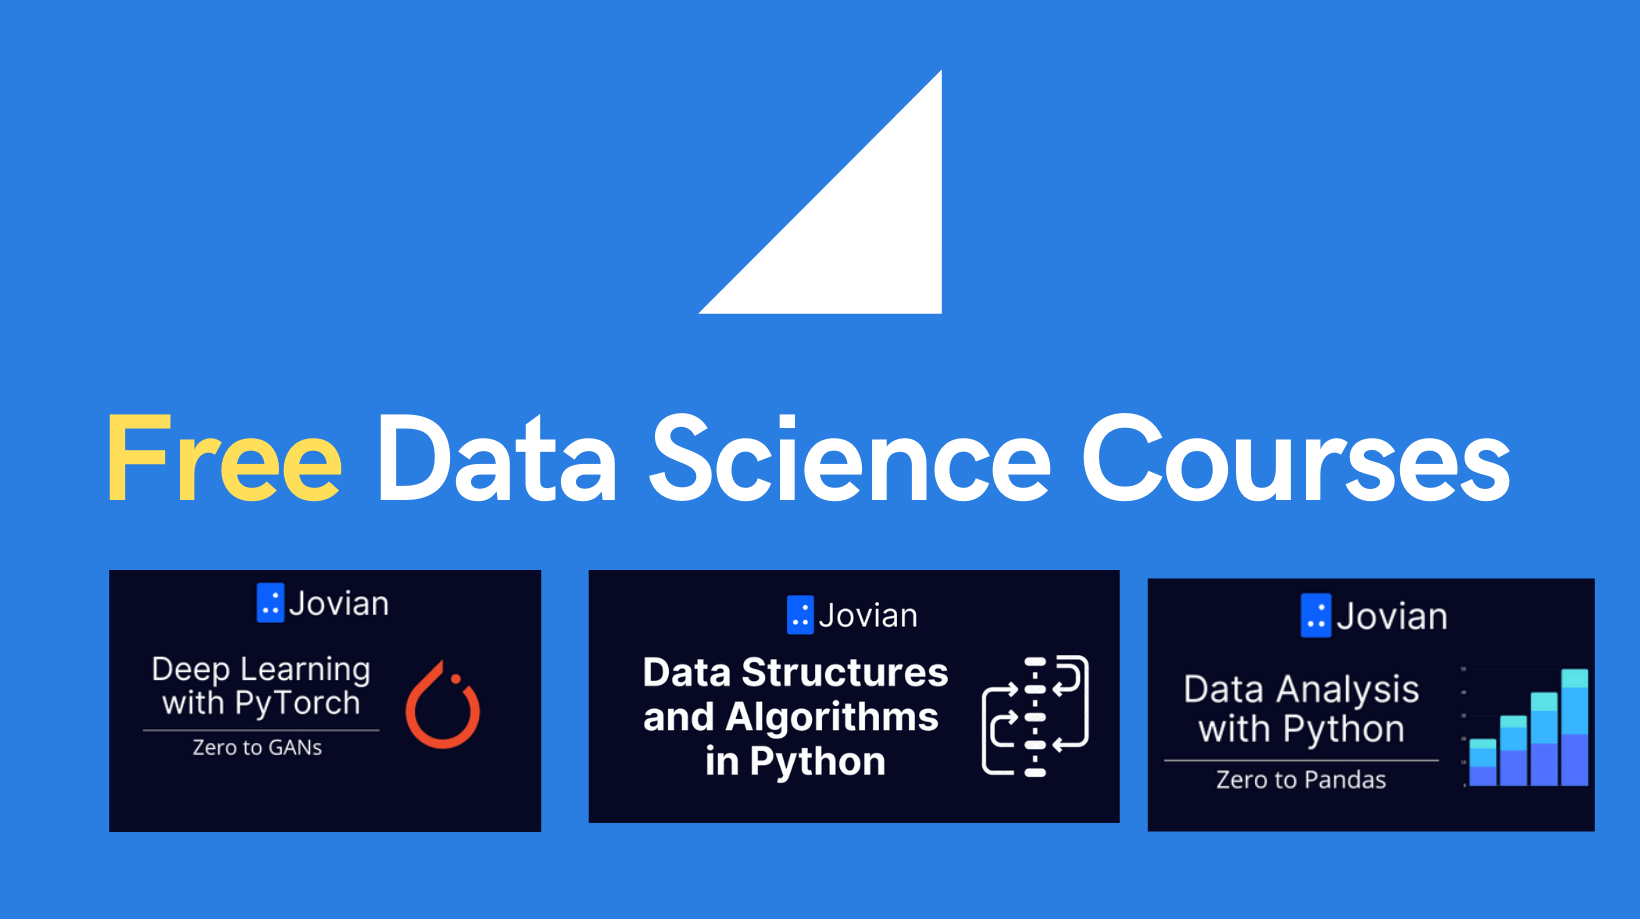 4 Data Science courses with a free certificate from Jovian